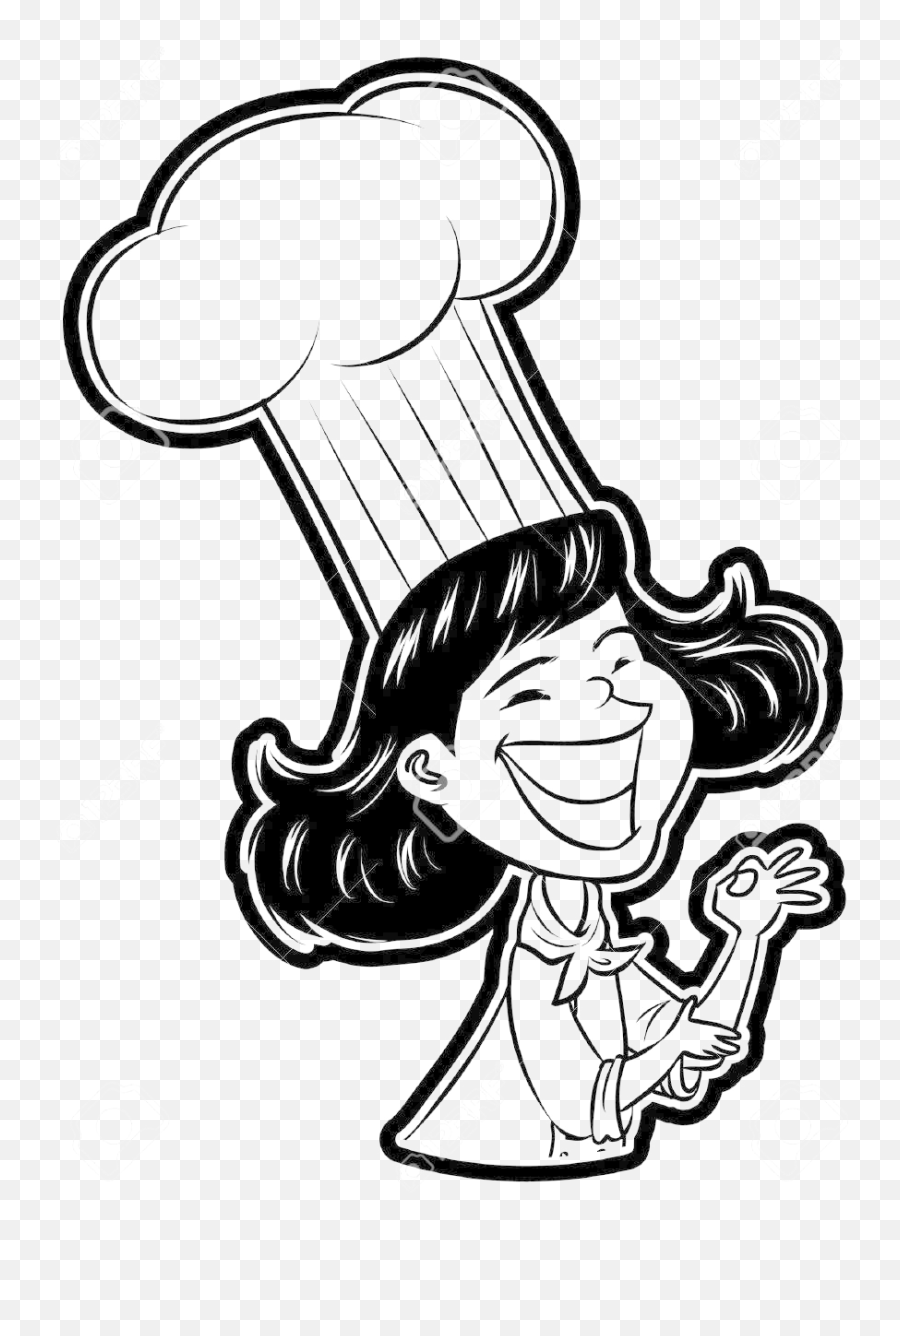 Chef Png Image Transparent Background Emoji,Chef Clipart Black And White